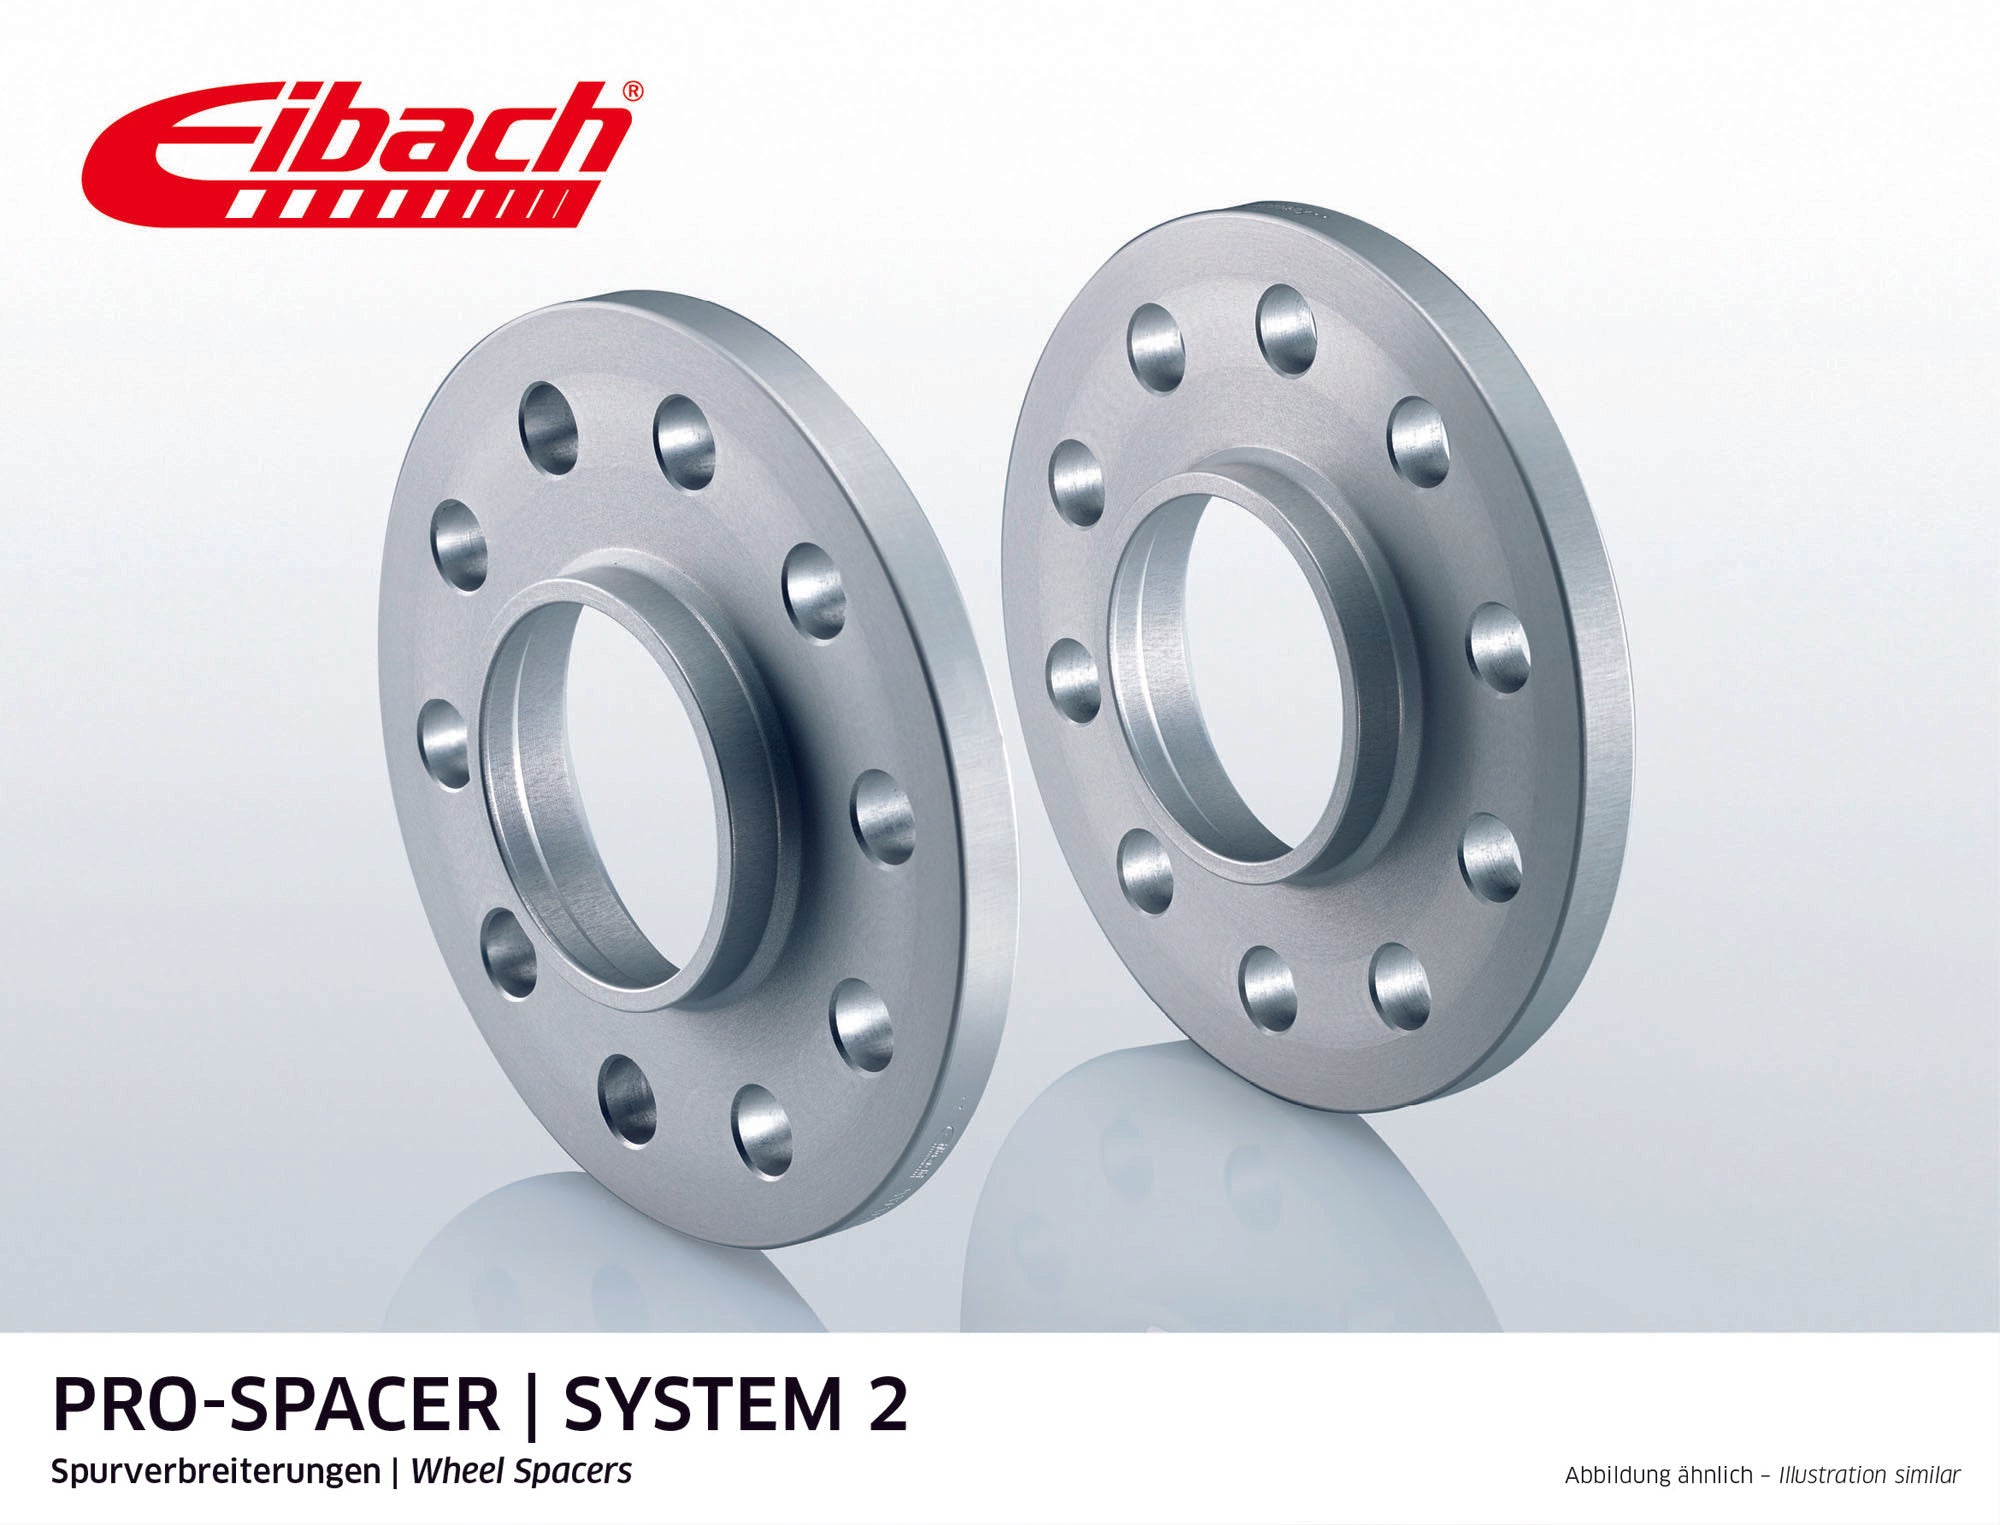 Eibach 18mm Pro-Spacer - Silver Anodized Wheel Spacer BOXSTER 1996-04 #S90-2-18-001